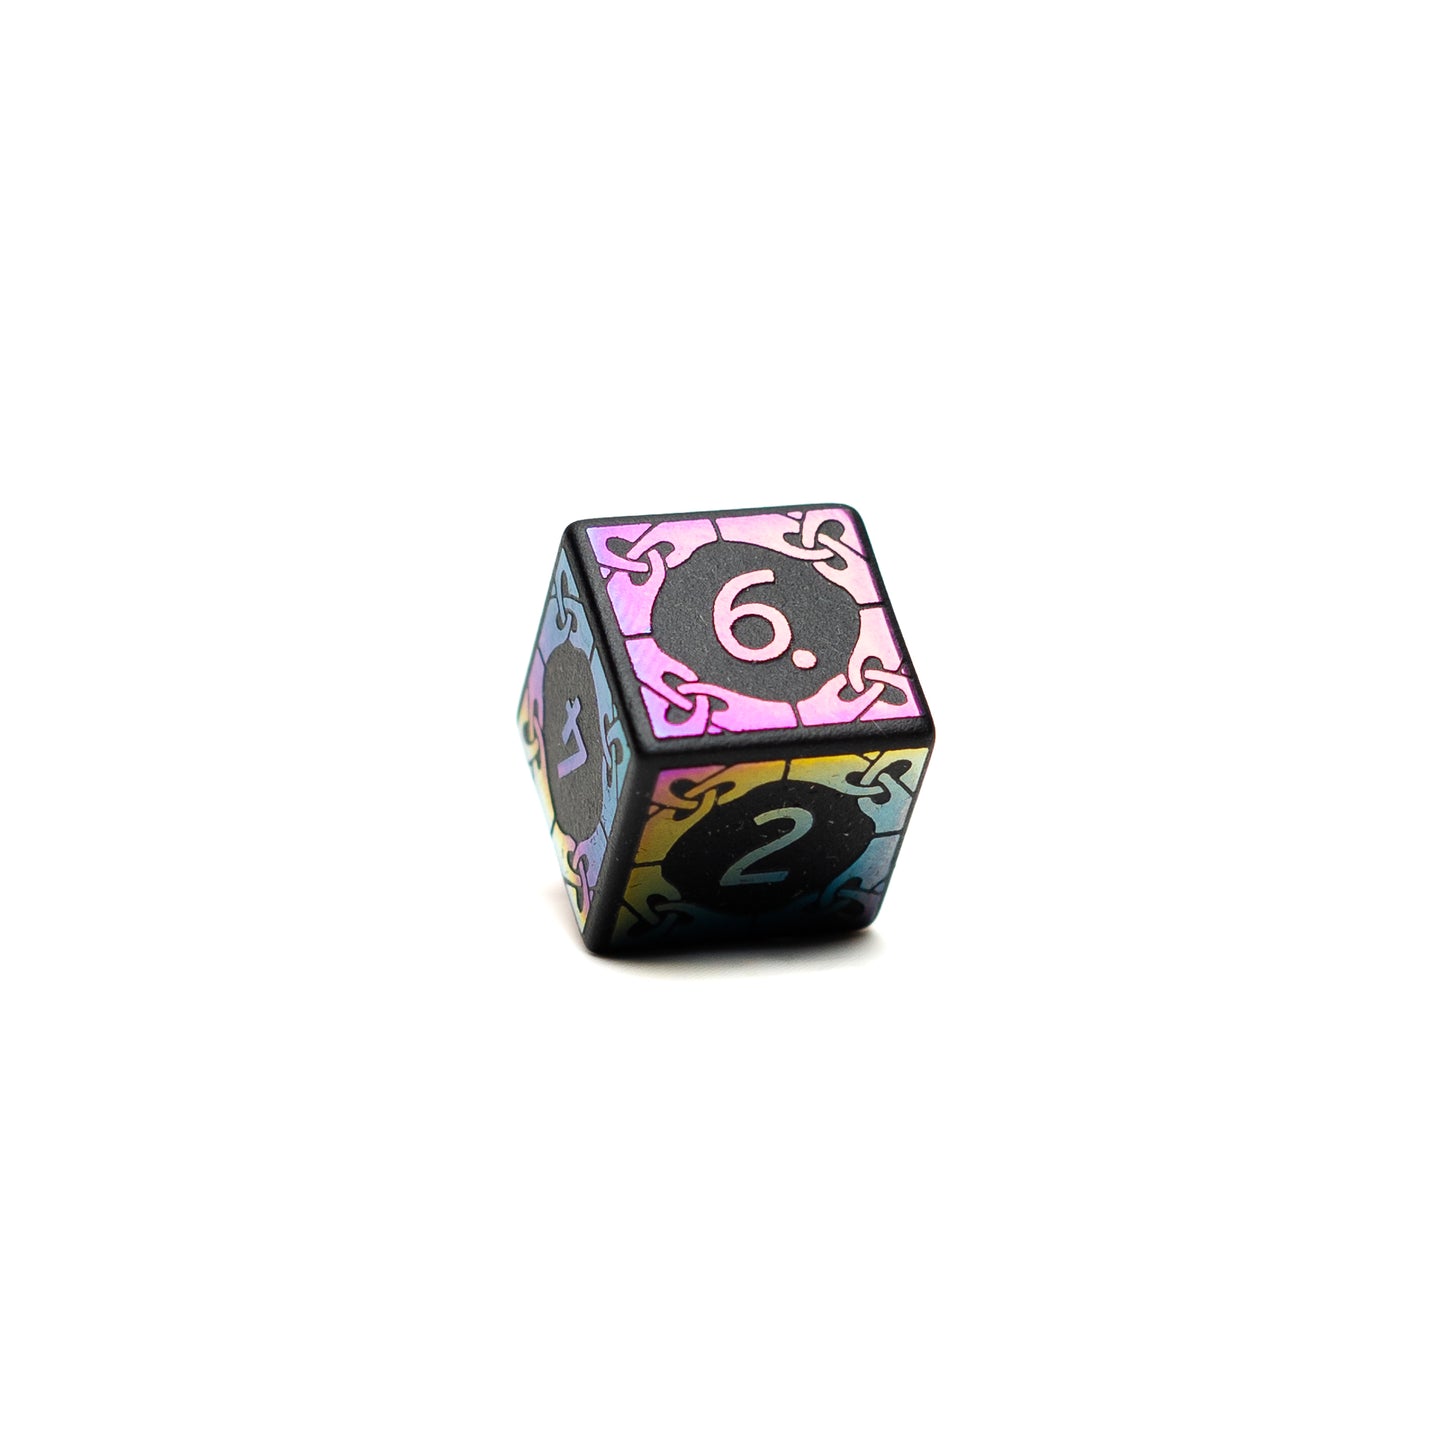 Roll Britannia Sharp Edged Obsidian Gemstone Dungeons and Dragons D6 Dice with Iridescent details